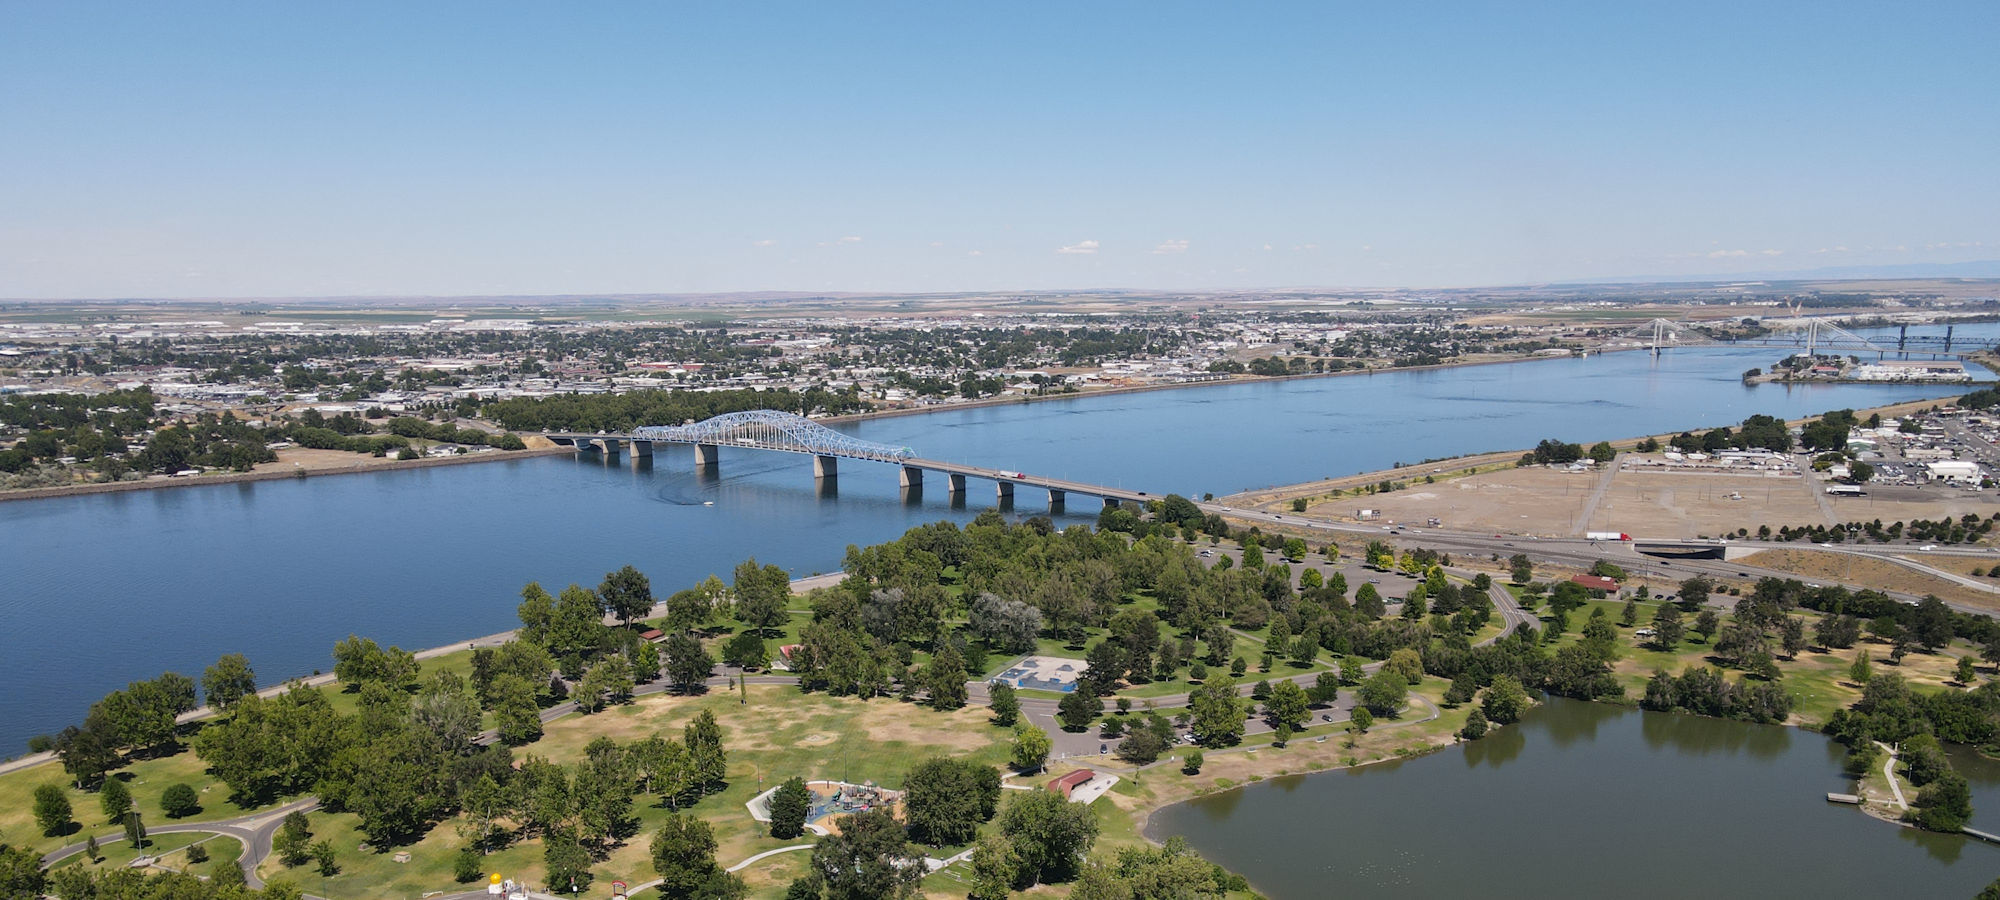 2401 West Canal Drive, #7b, Kennewick, WA, 99336, Condominium For Sale, Condo, Condominium, Tri Cities, Tri-Cities, Homes For Sale, Real Estate